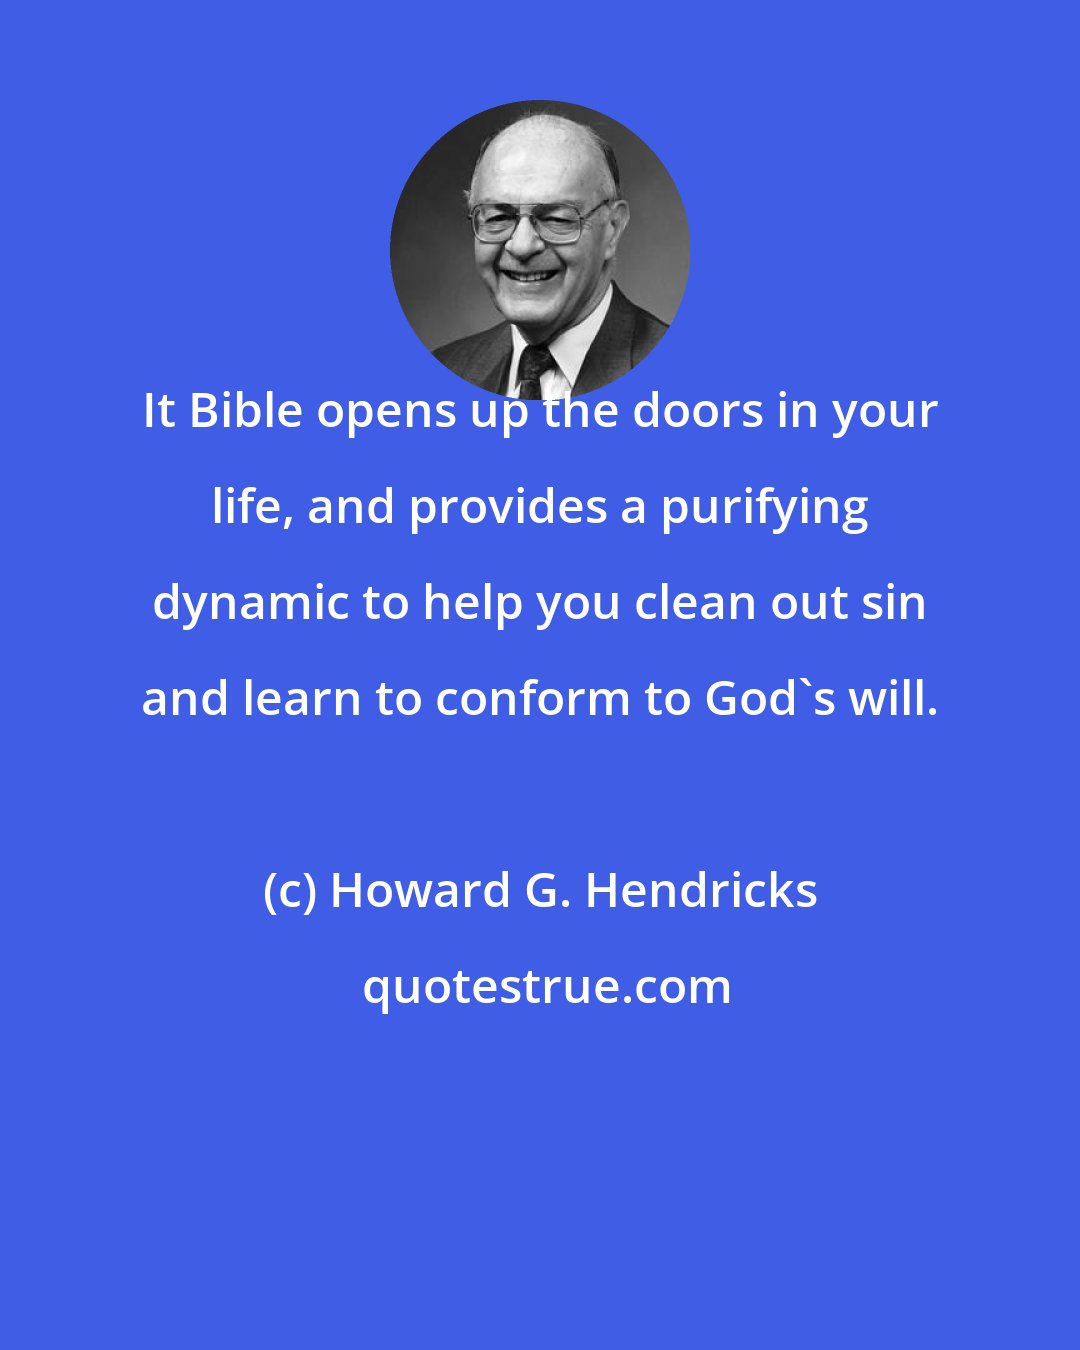 Howard G. Hendricks: It Bible opens up the doors in your life, and provides a purifying dynamic to help you clean out sin and learn to conform to God's will.